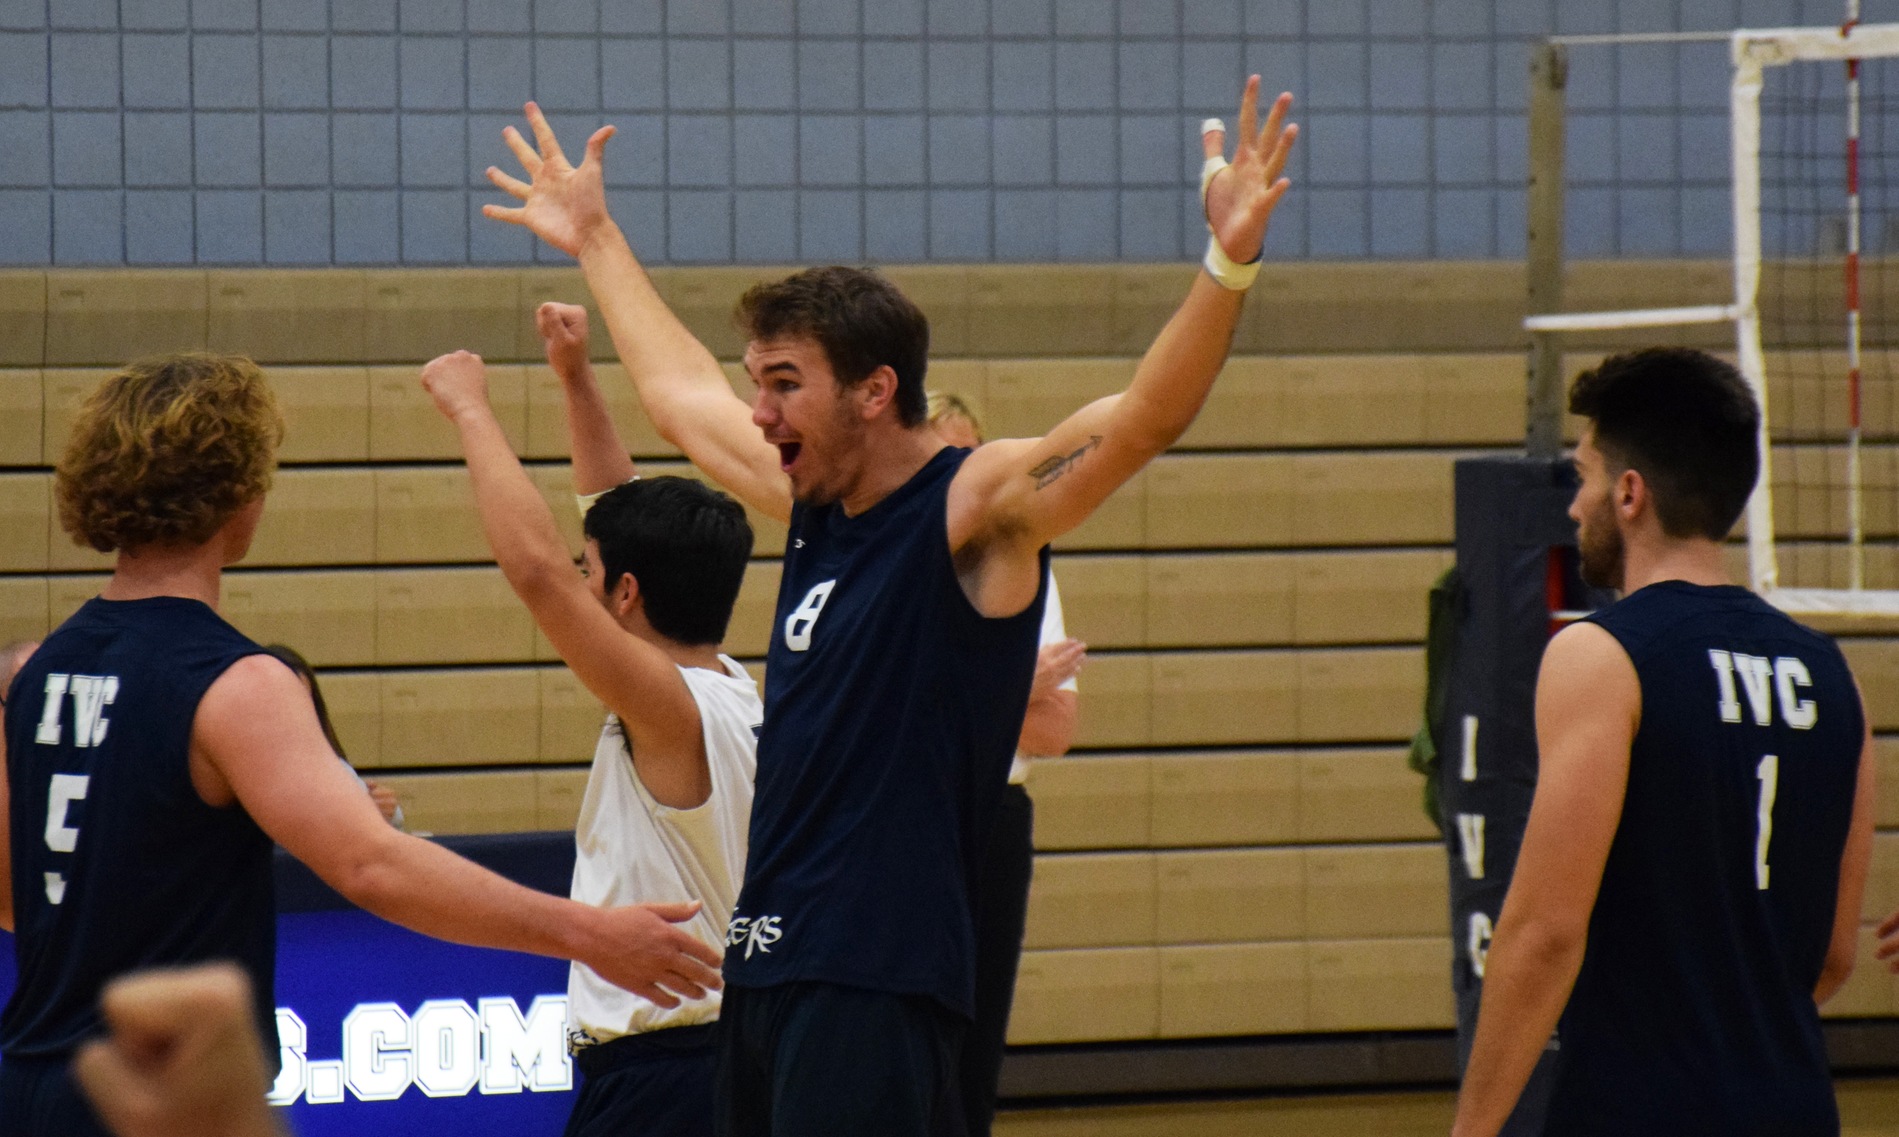 Men's volleyball team has an easy time in sweep at Grossmont